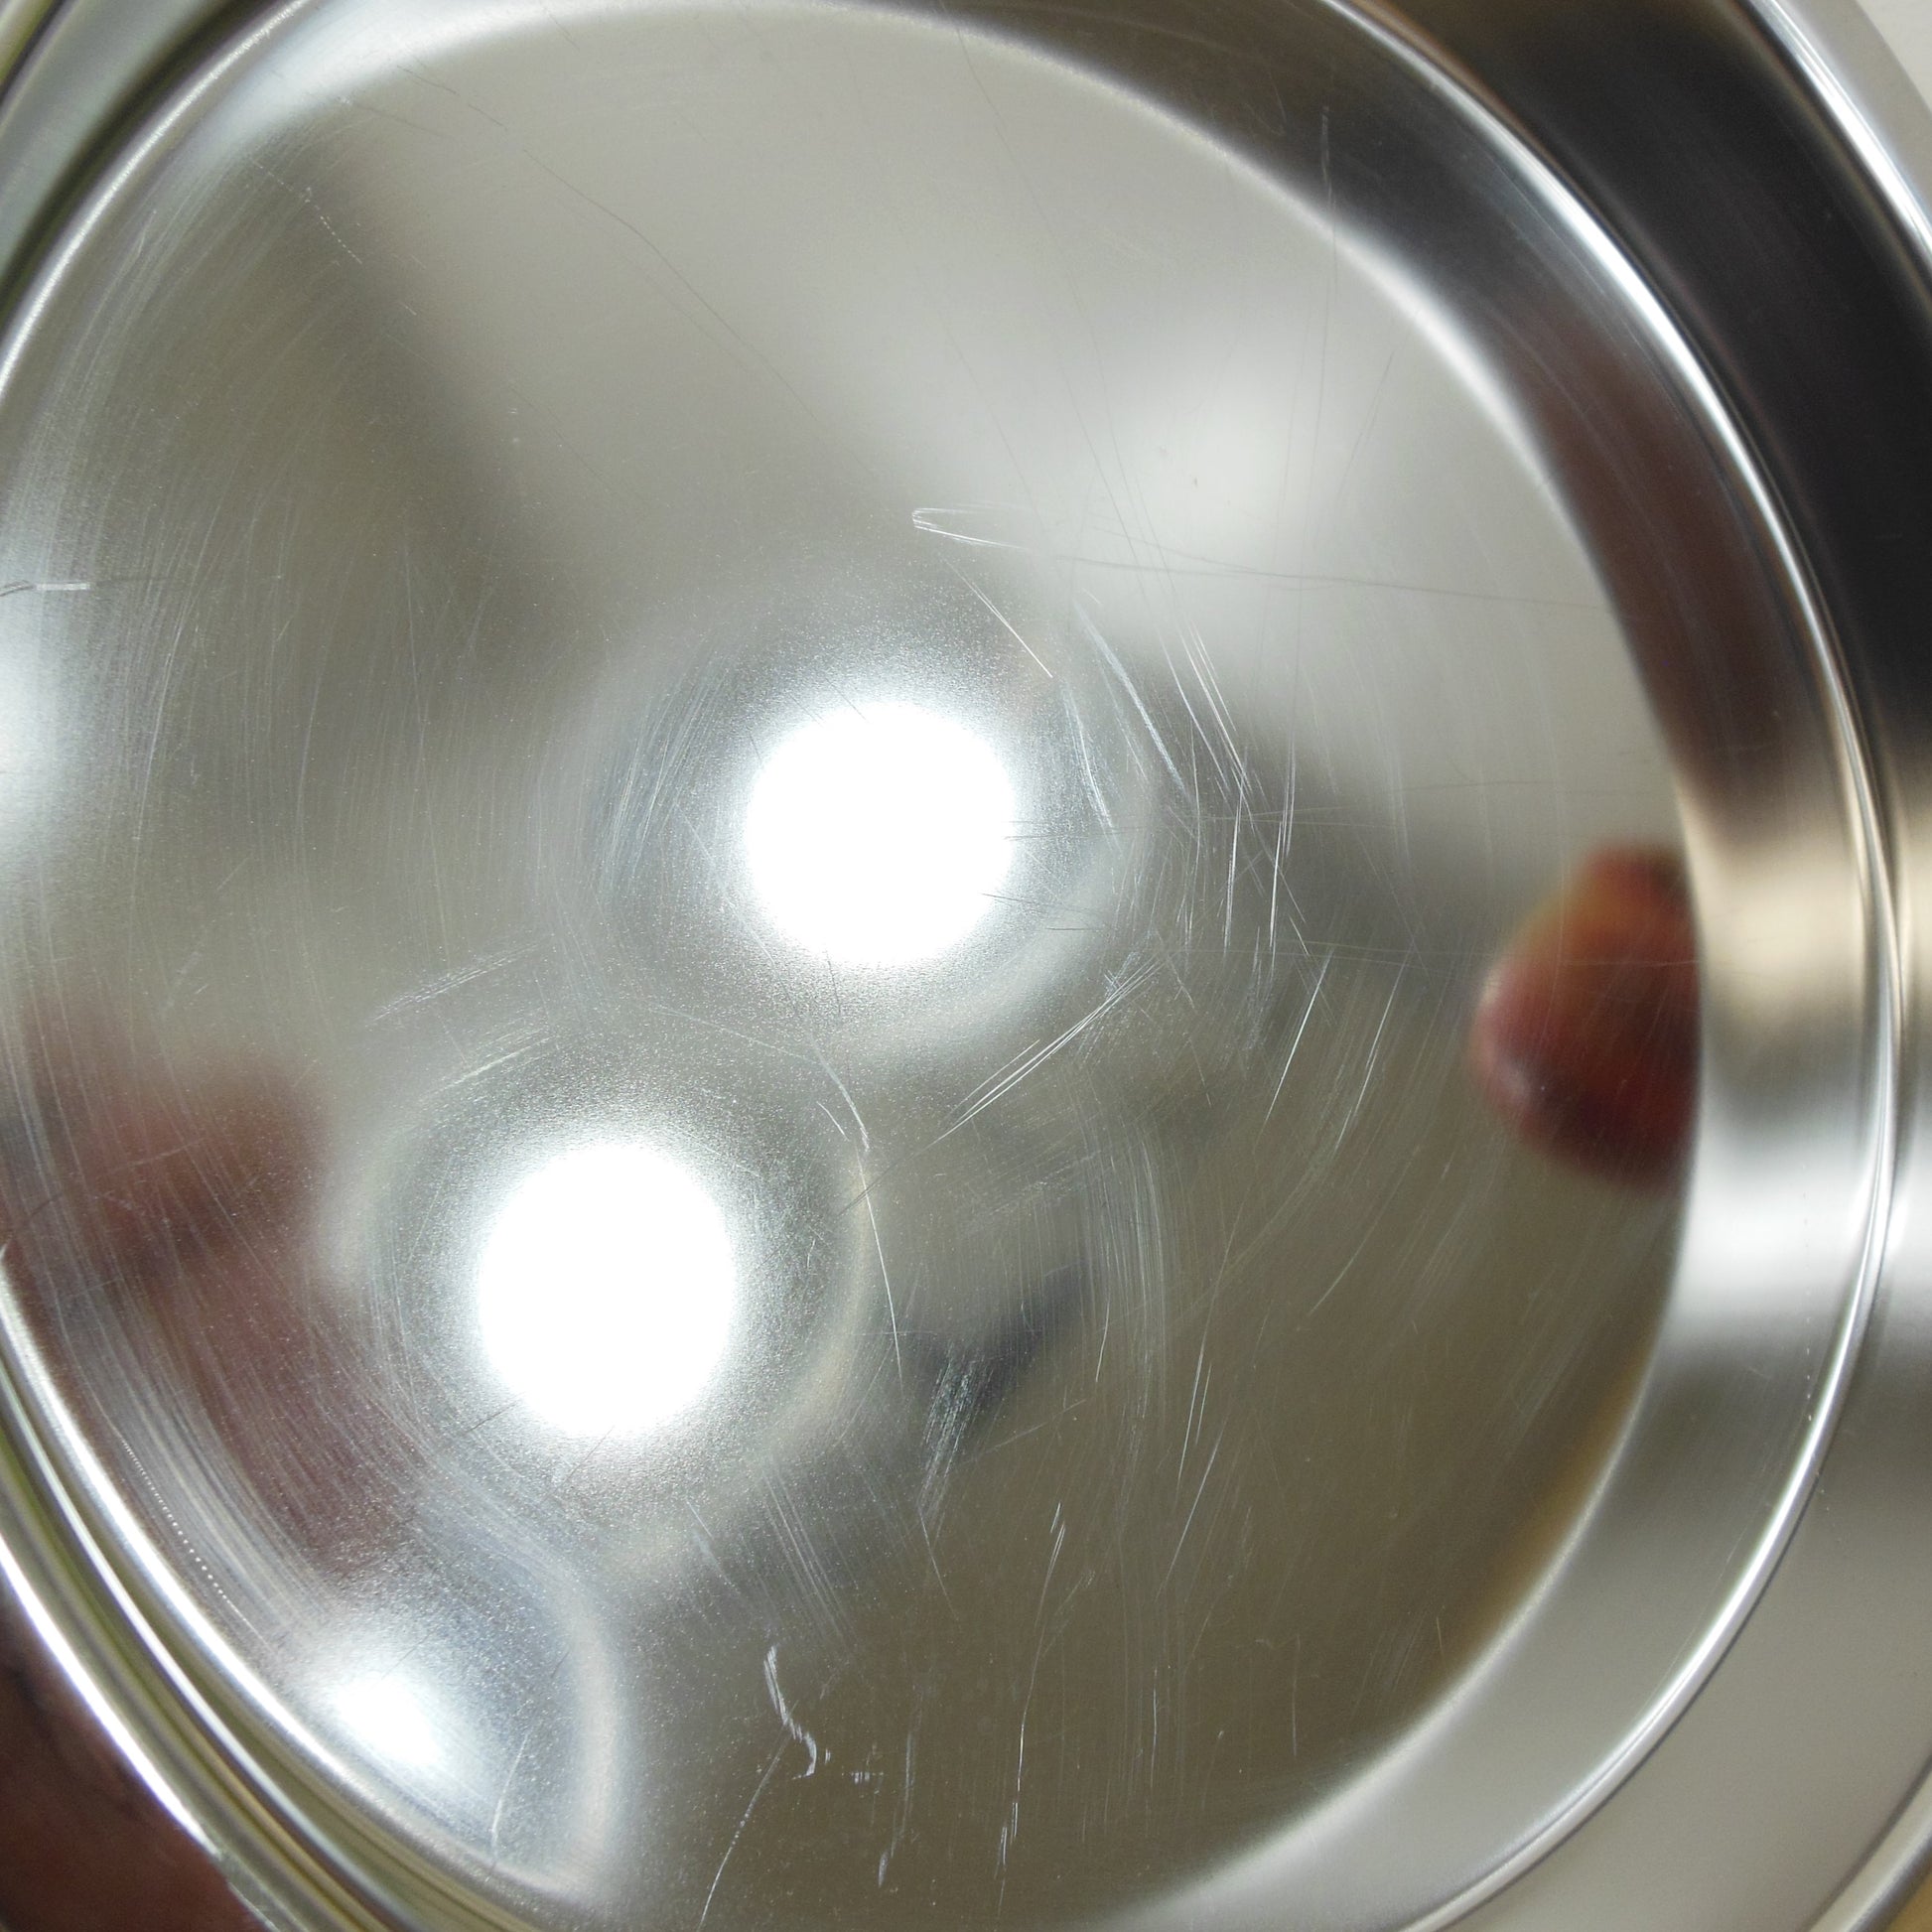 Revere Ware 1988 Stainless Steel 9" Round Cake Pan 2509 used